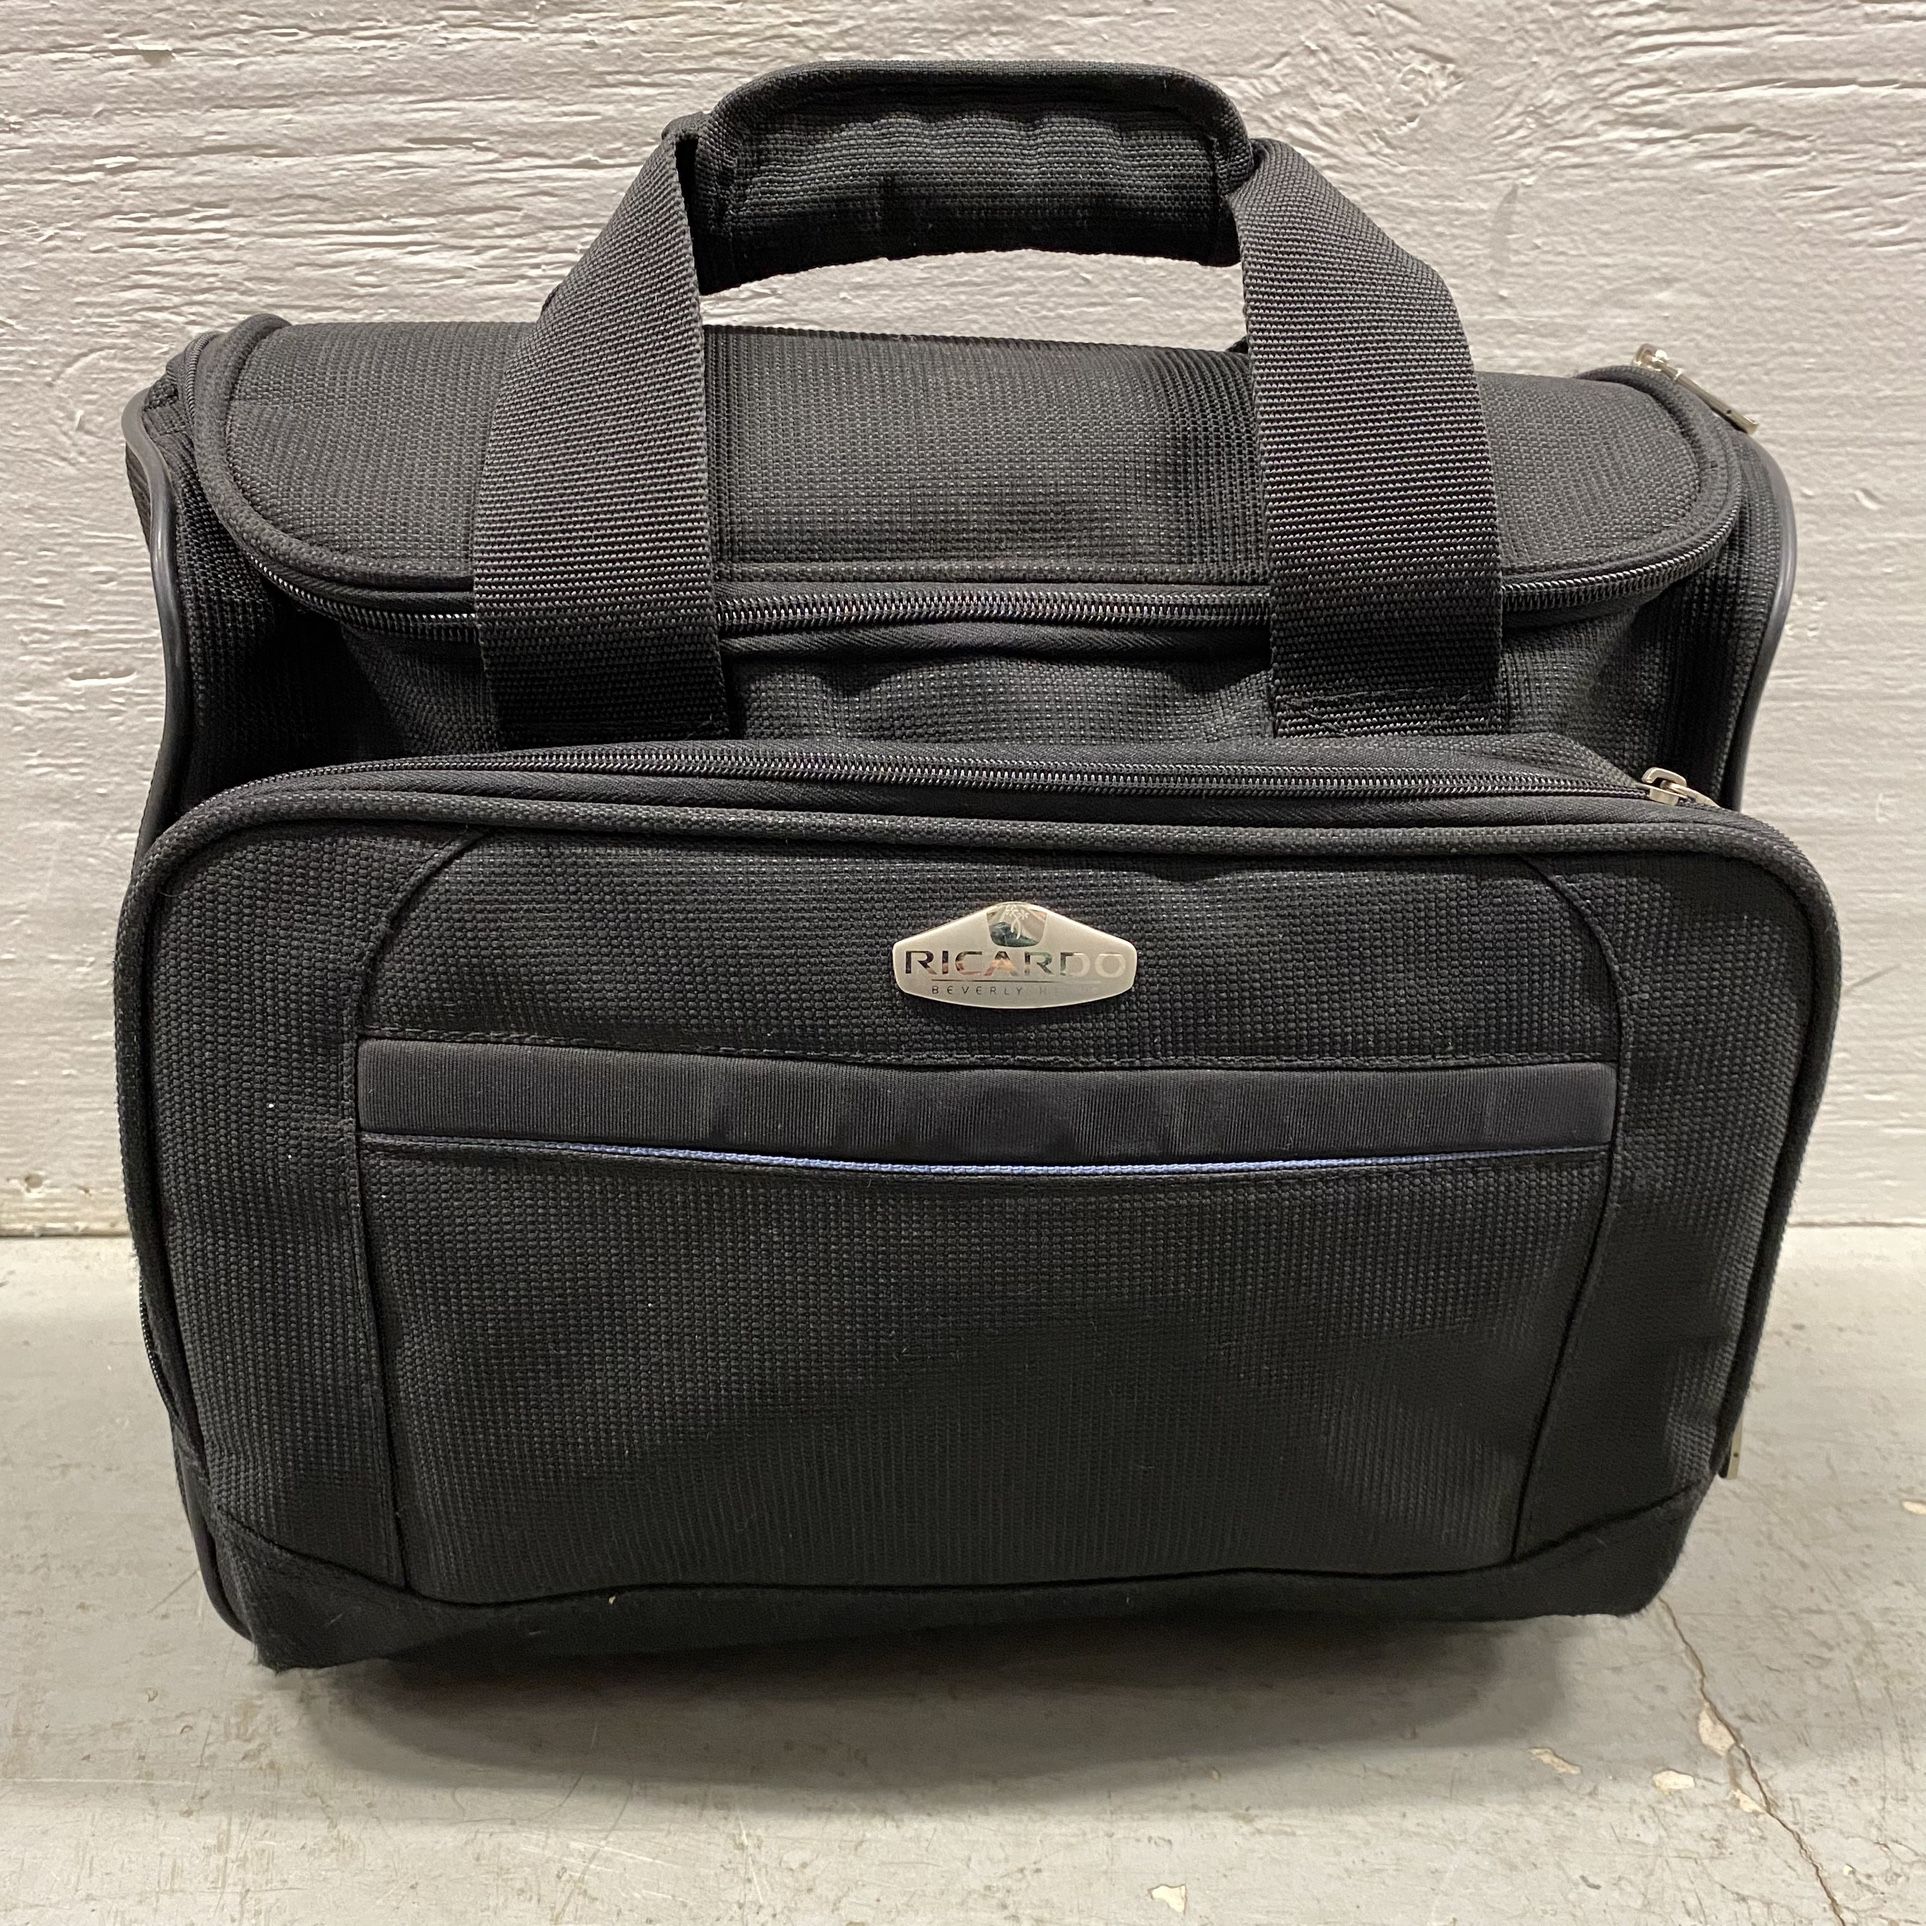  Ricardo Beverly Hills Black Carry-On Personal Item Travel Bag  Great pre-owned condition.   Measurements:  16” Wide x 13 1/2” Tall x 10” Deep  Pick u